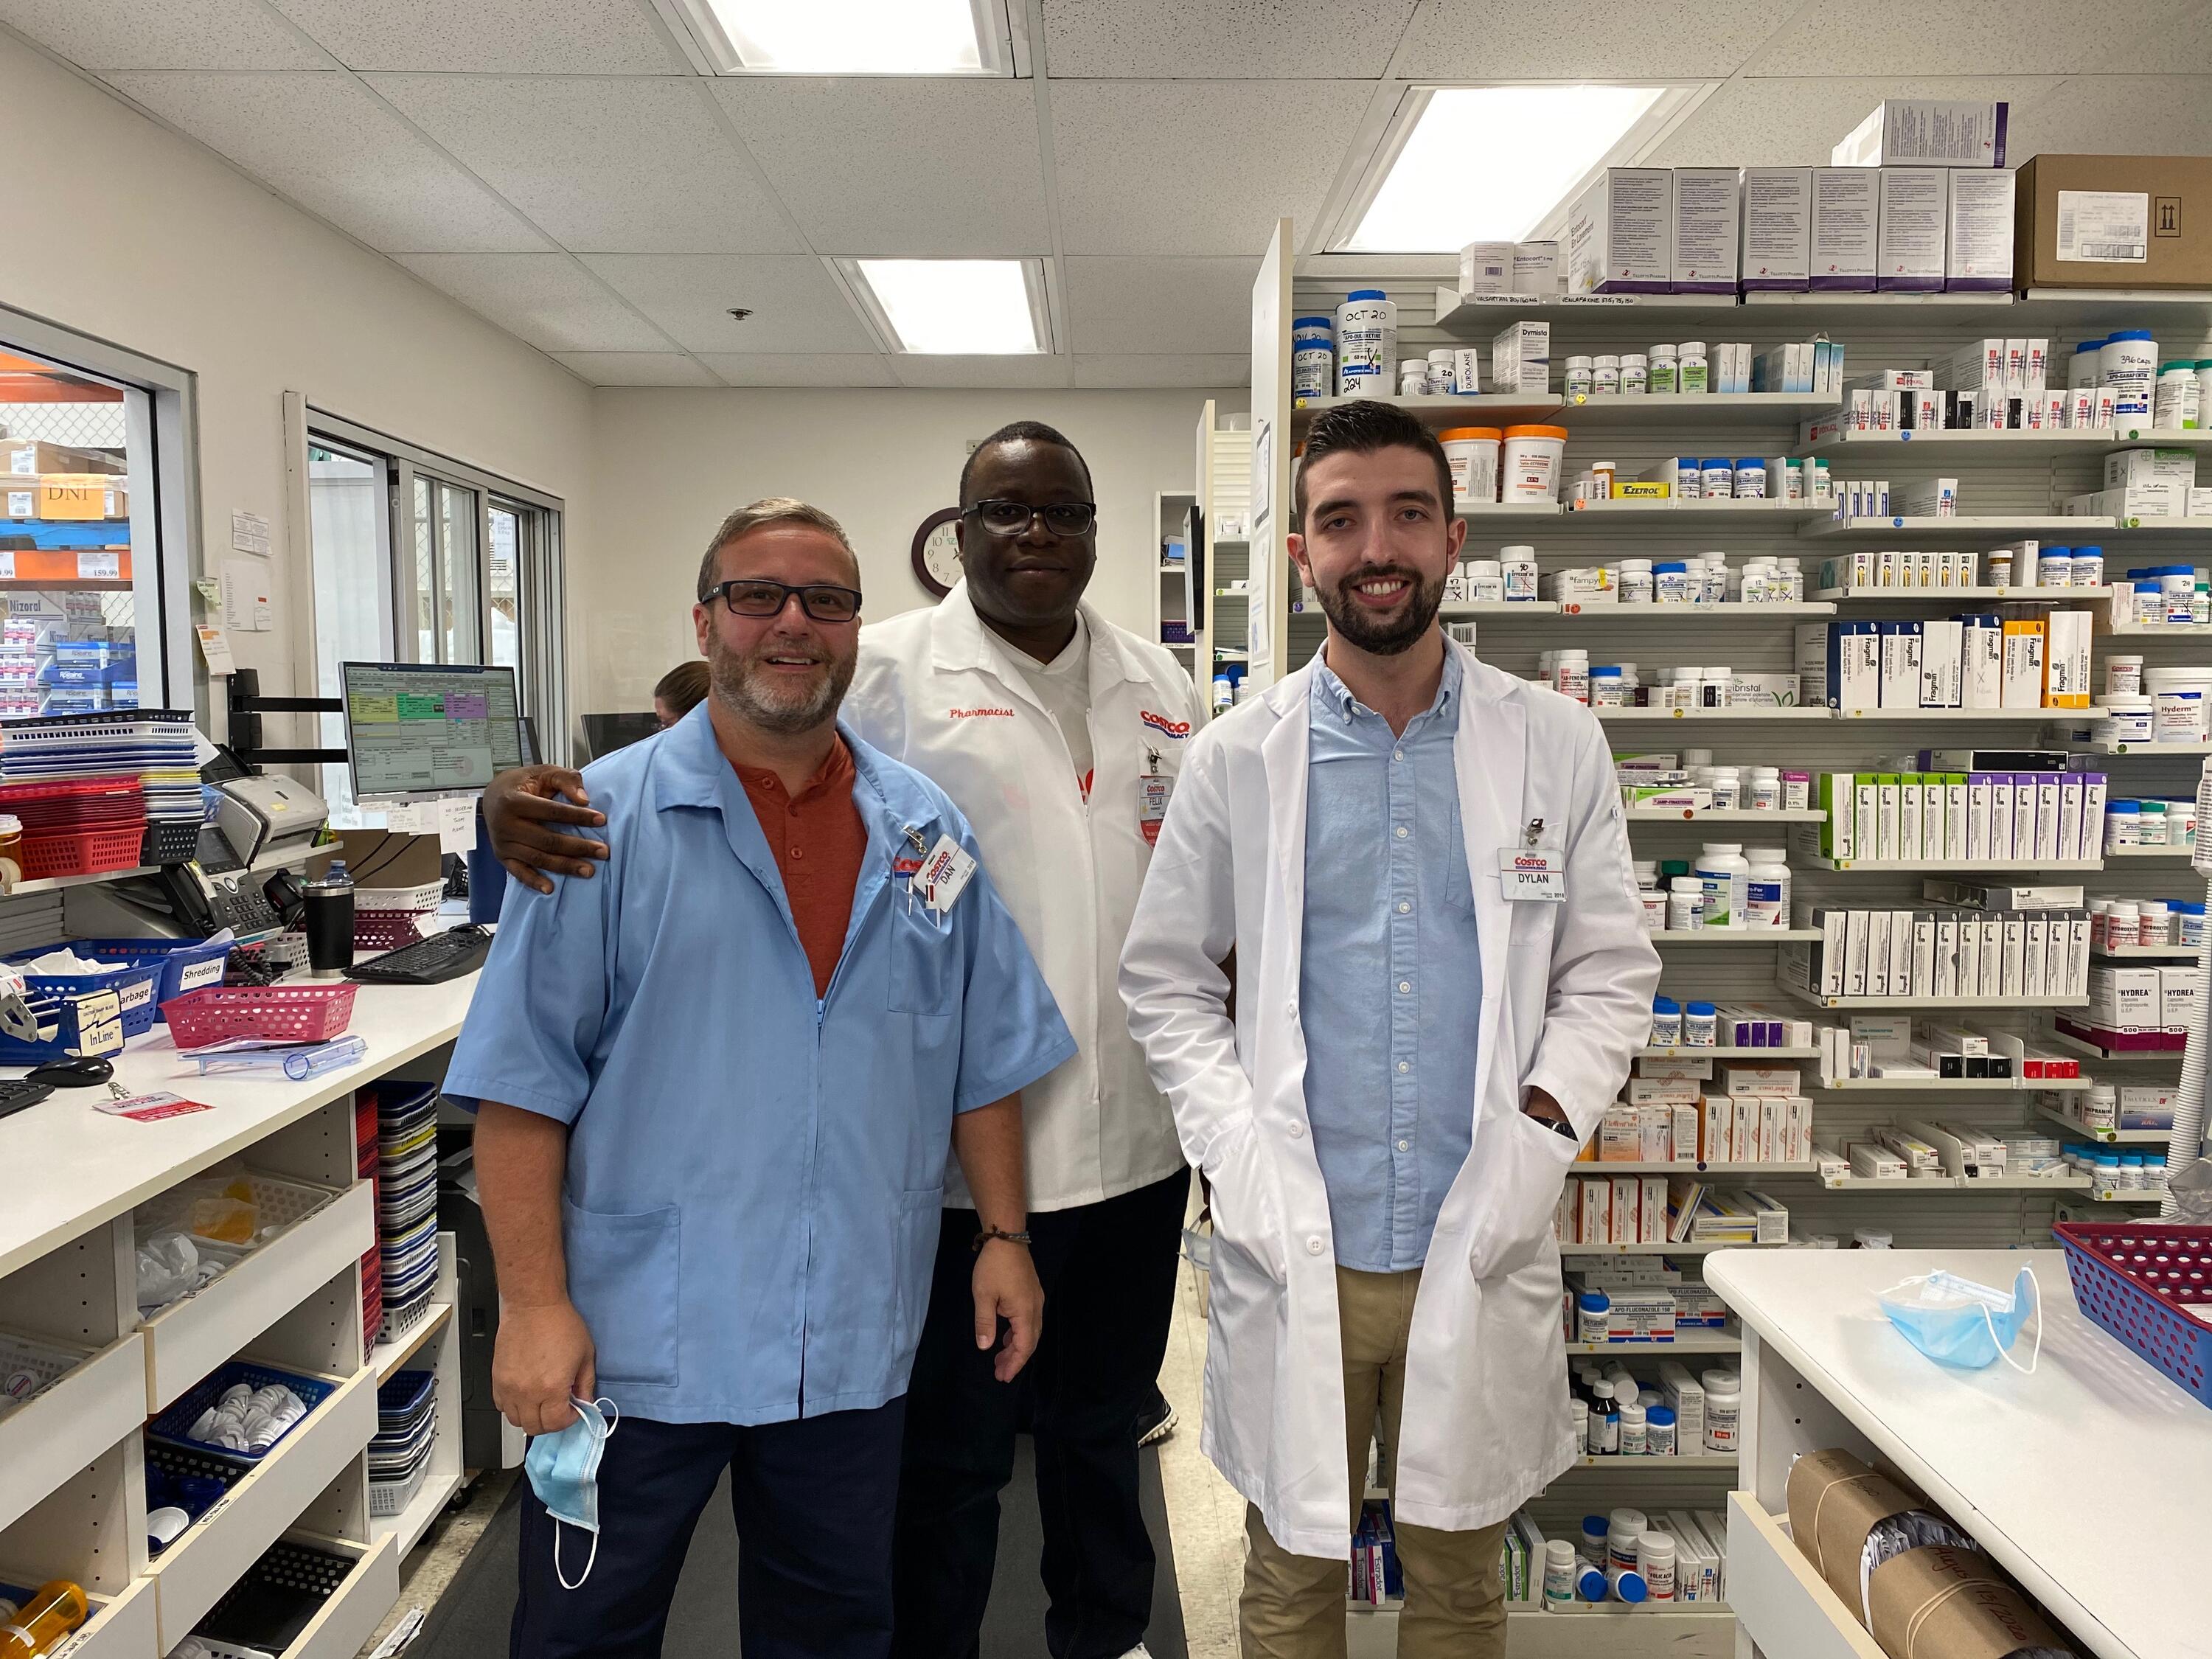 A coworker with Dylan and his supervisor standing in the pharmacy smiling